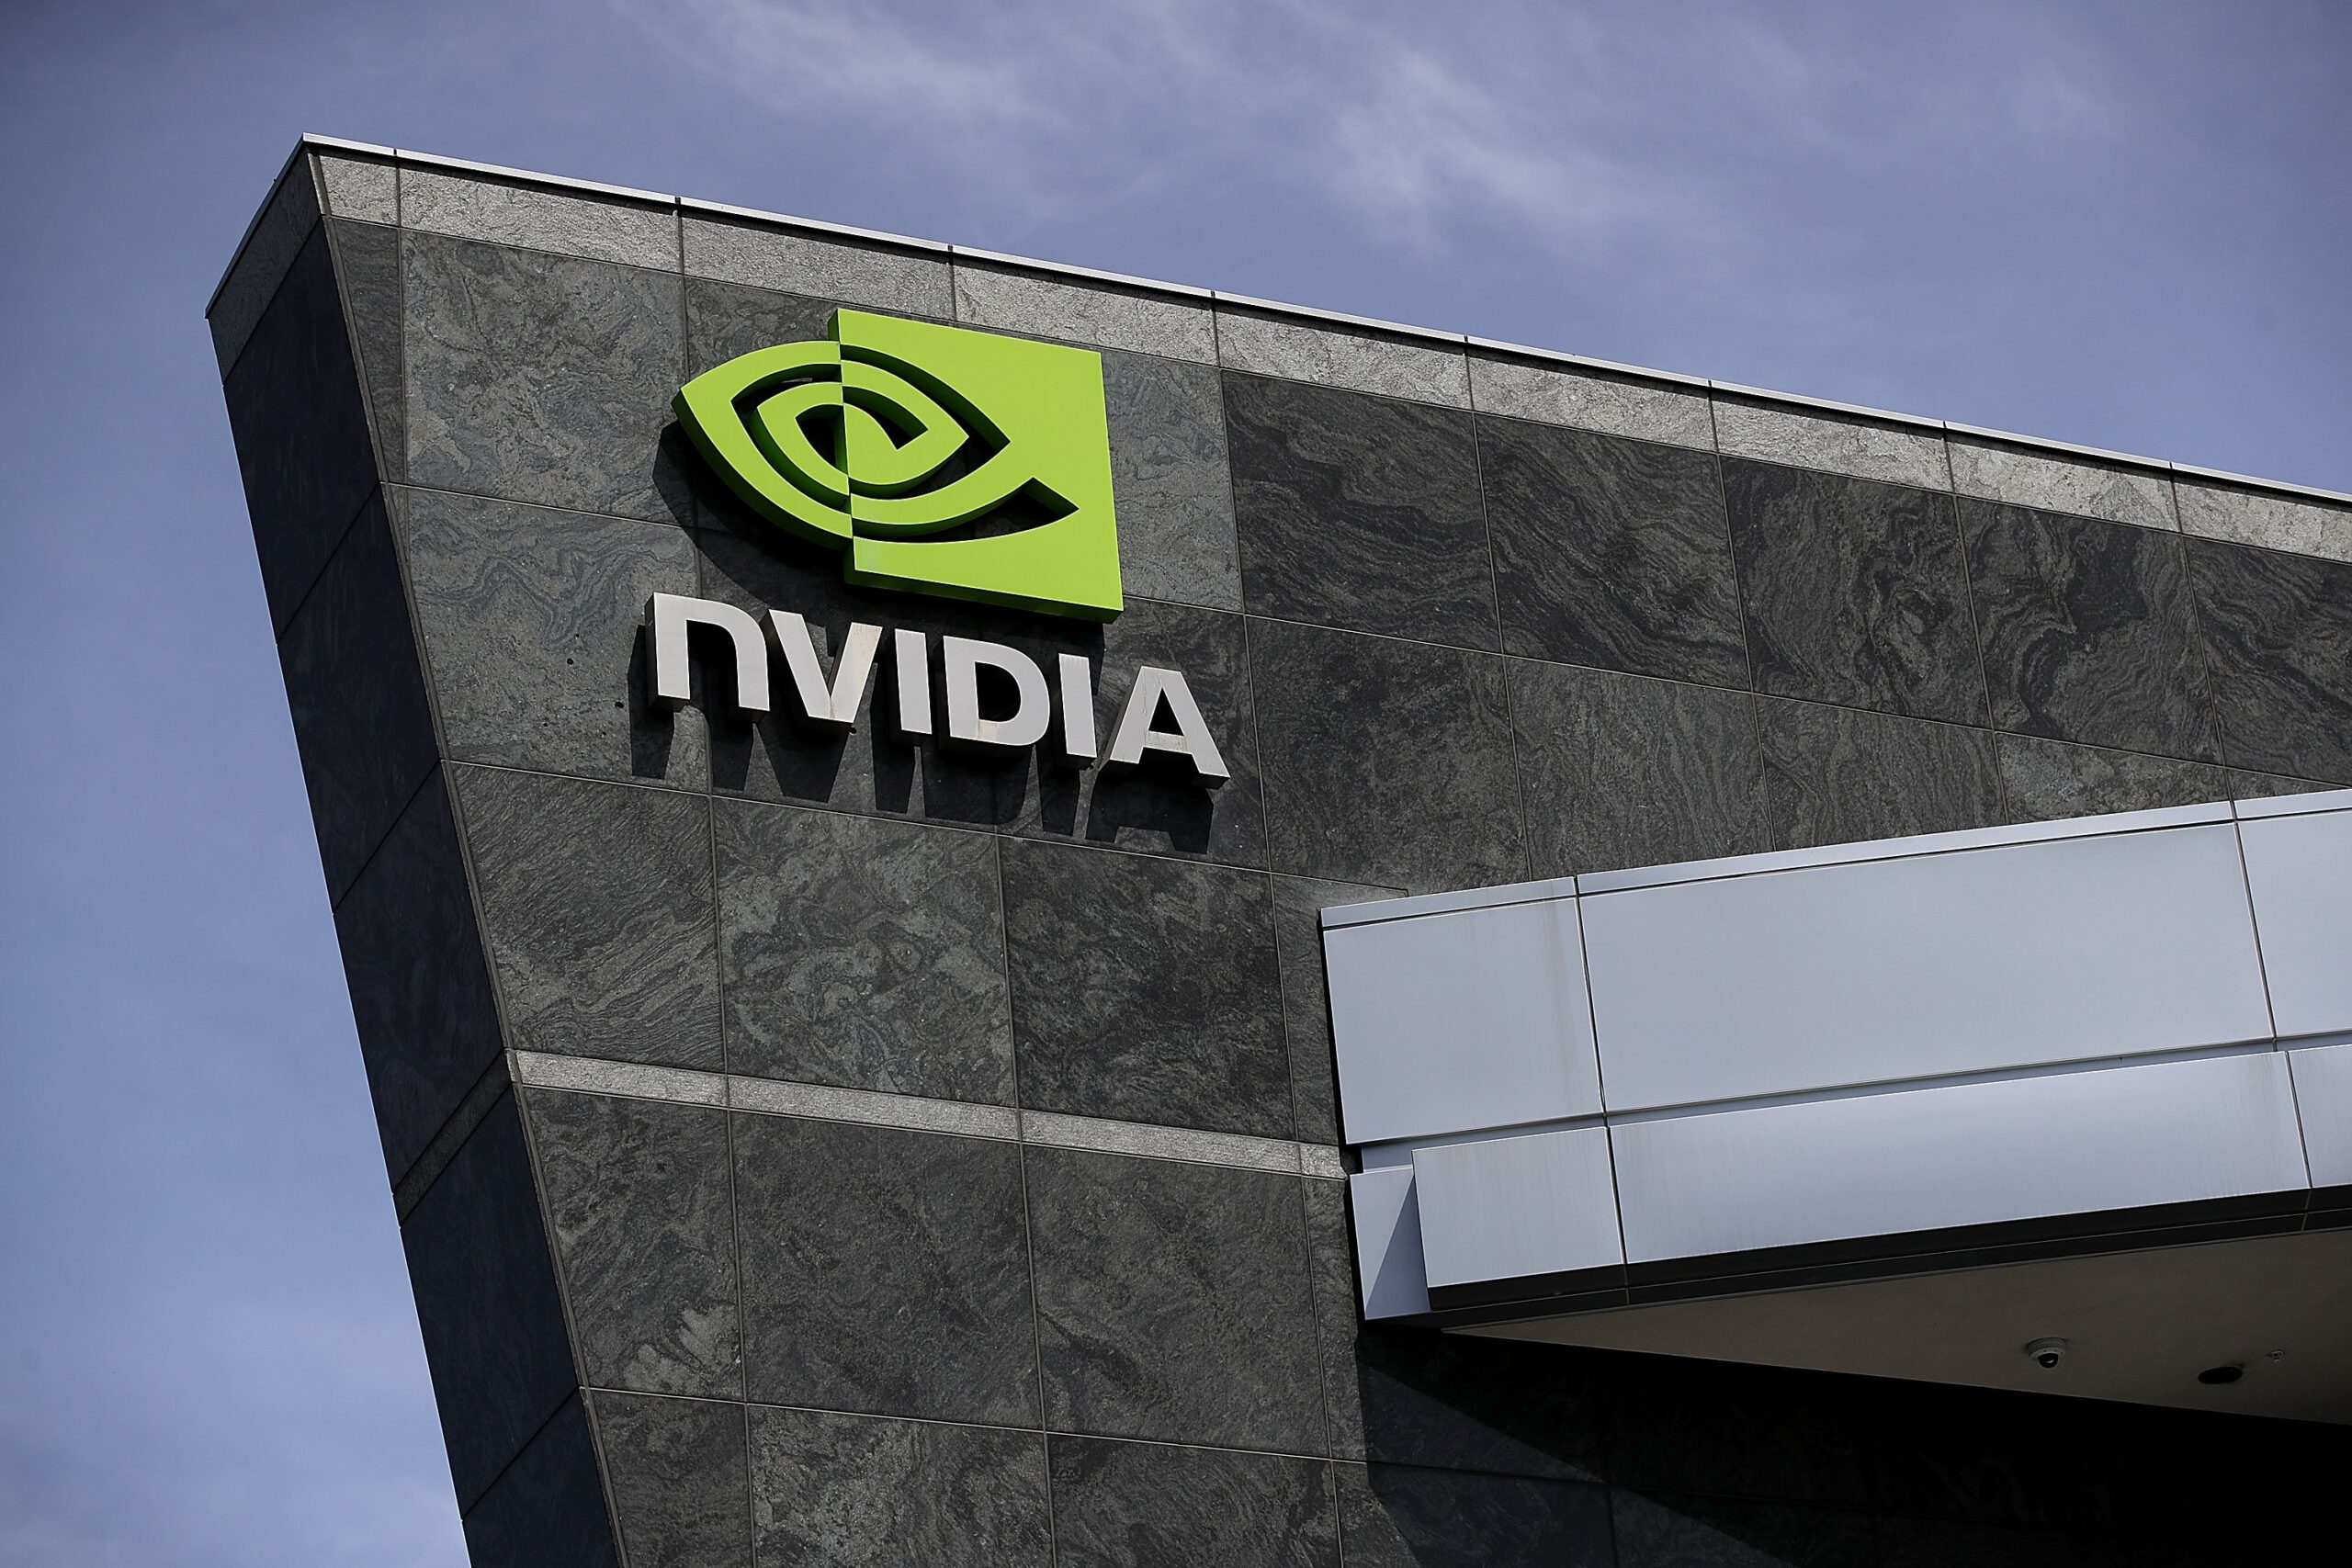 Google, Qualcomm, and Microsoft are against Nvidia’s acquisition of ARM